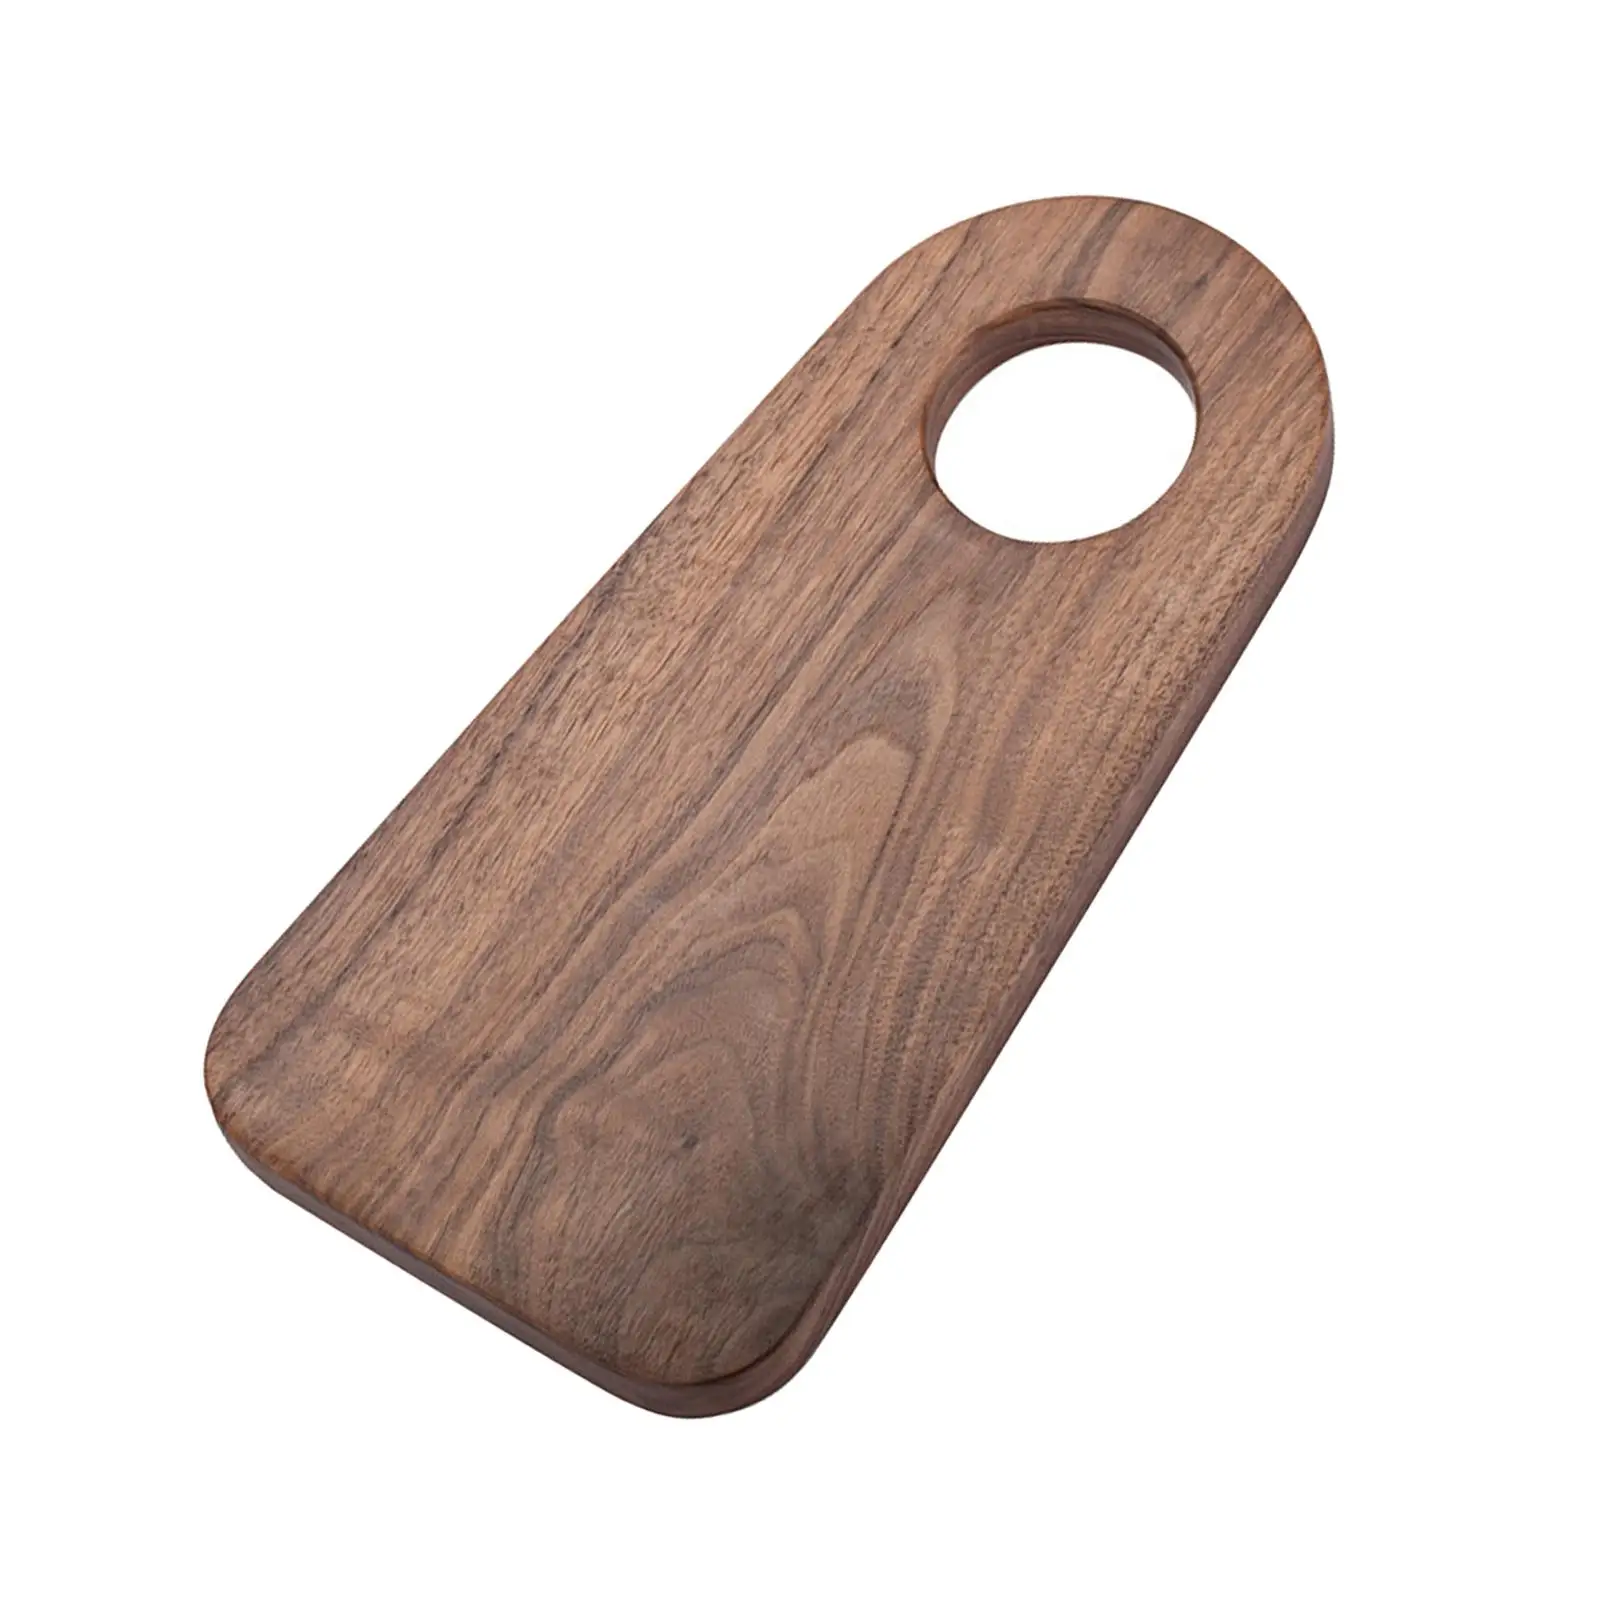 Wooden Chopping Board Kitchen Baking Tools Utensils with Handle Bread Tray Serving Board Cutting Board for Vegetables Fruits